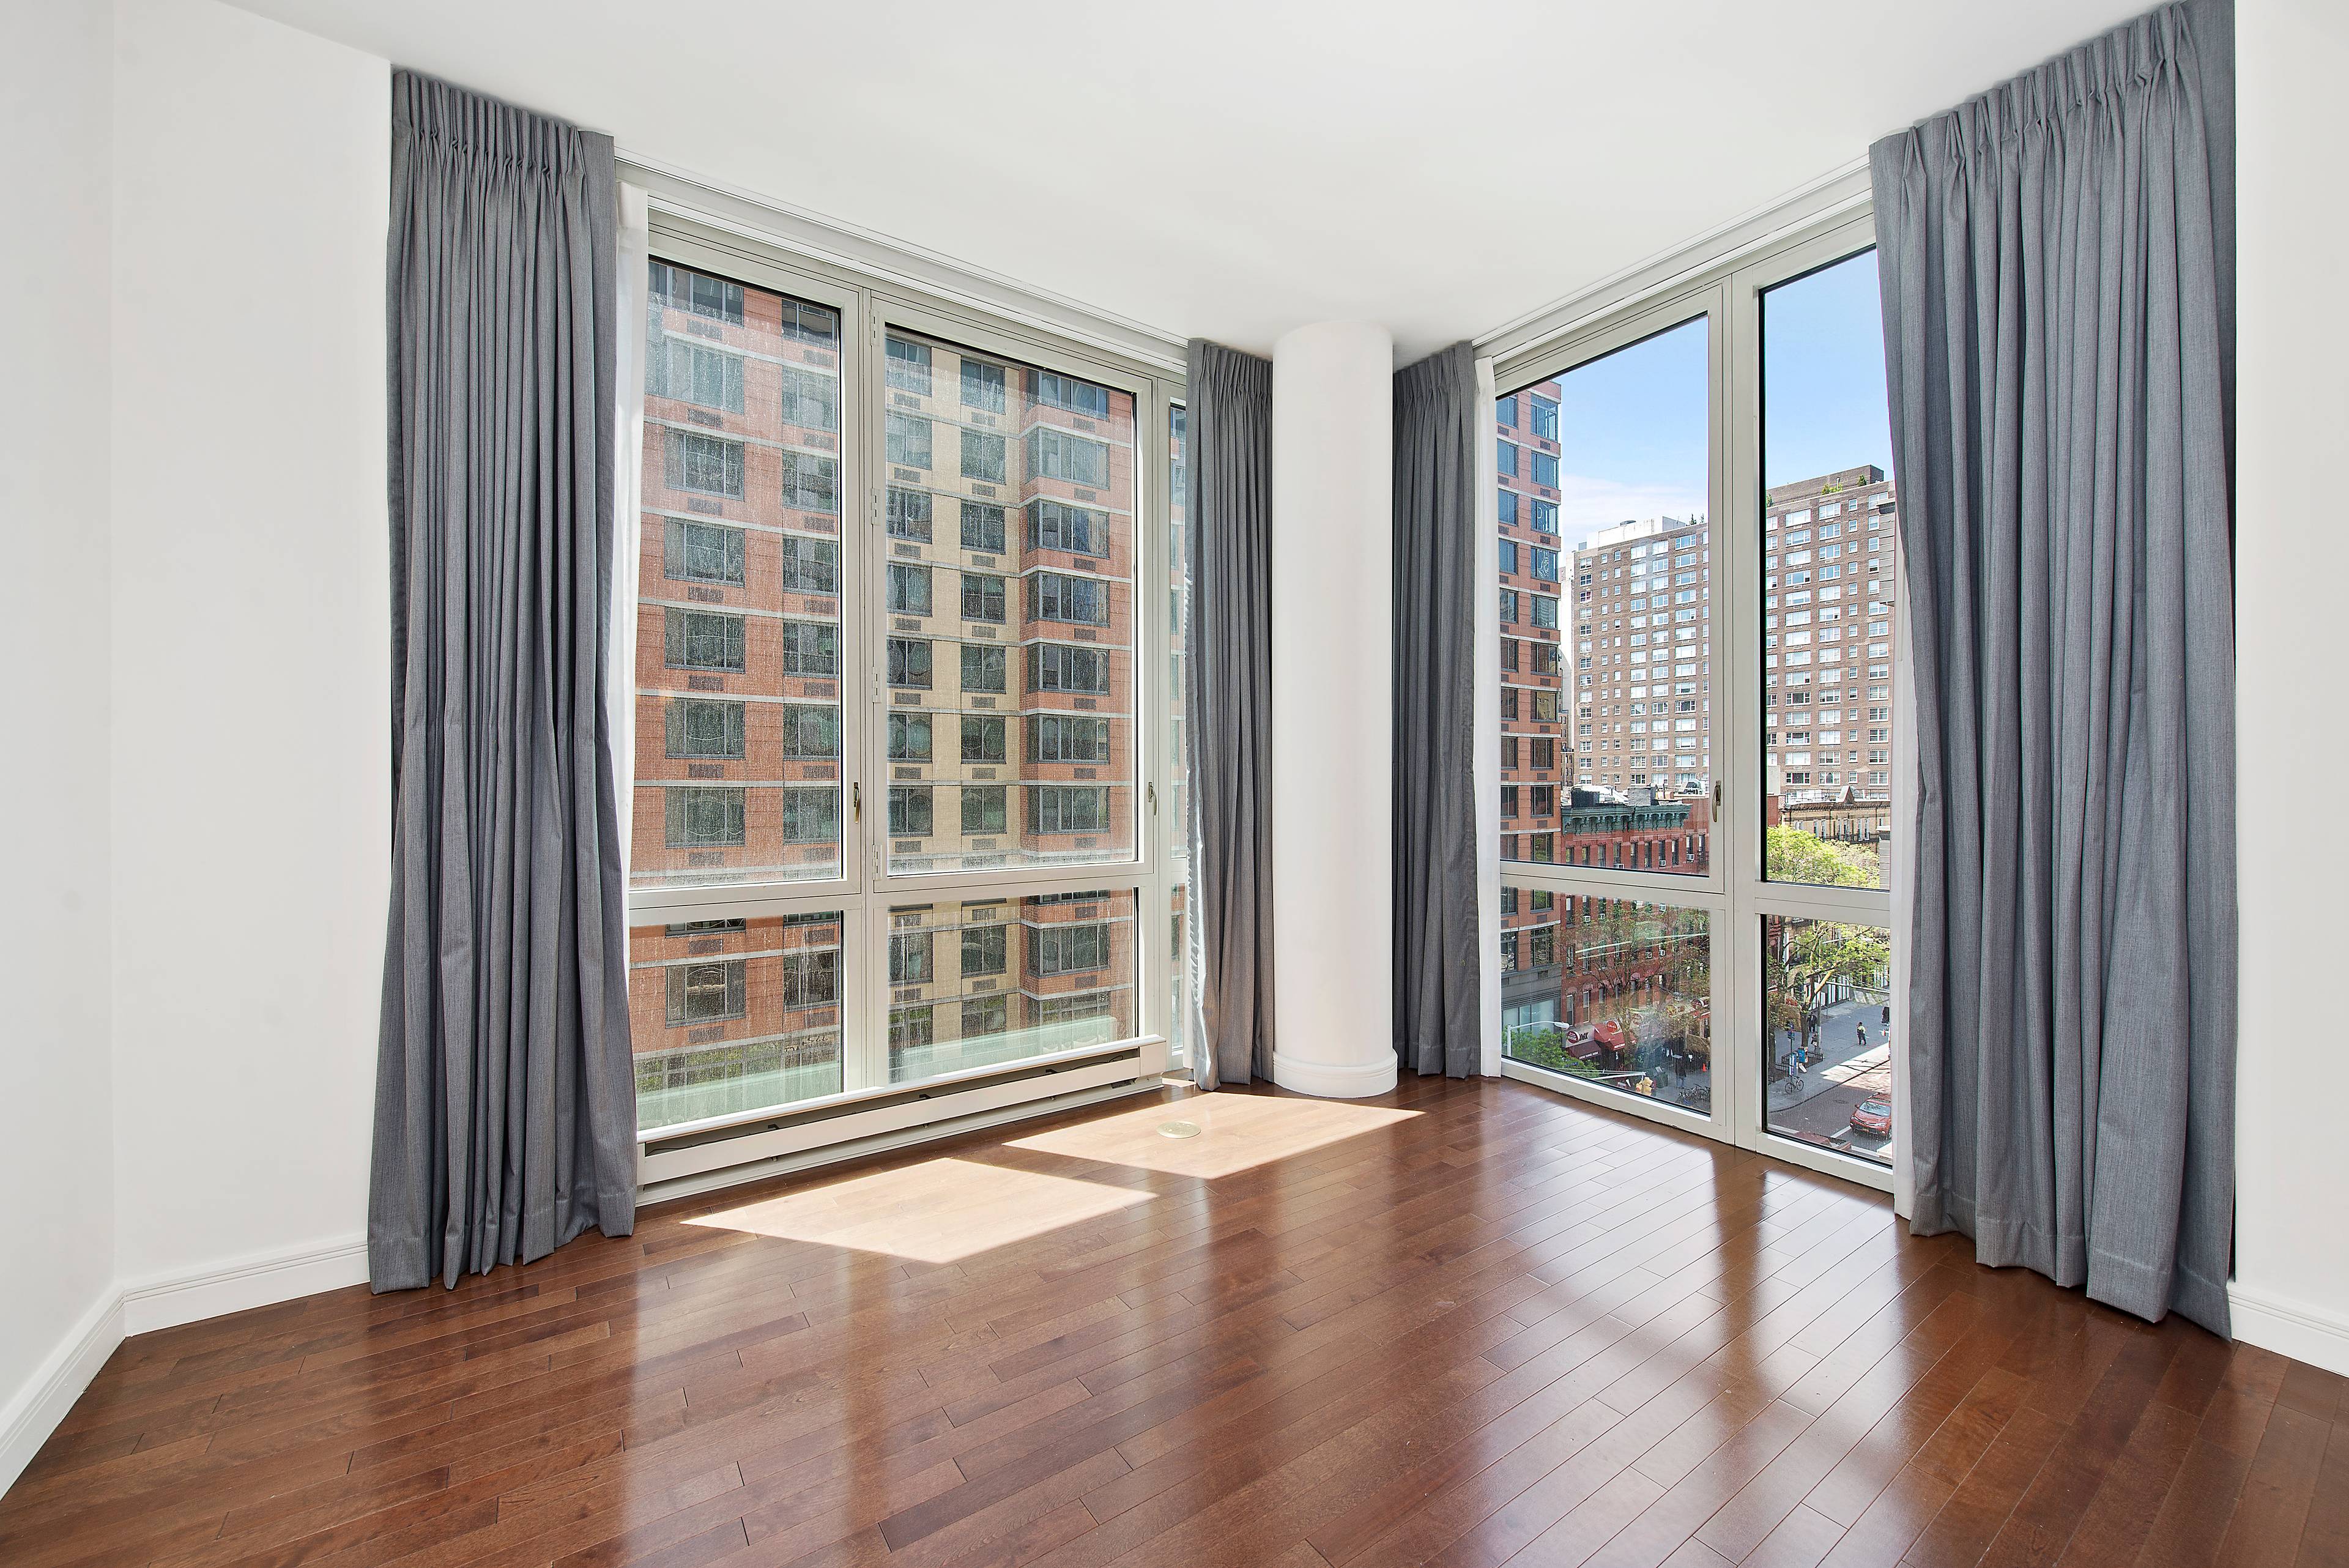 This South facing one bedroom apartment offers beautiful city views and boundless light in the heart of bustling Murray Hill.